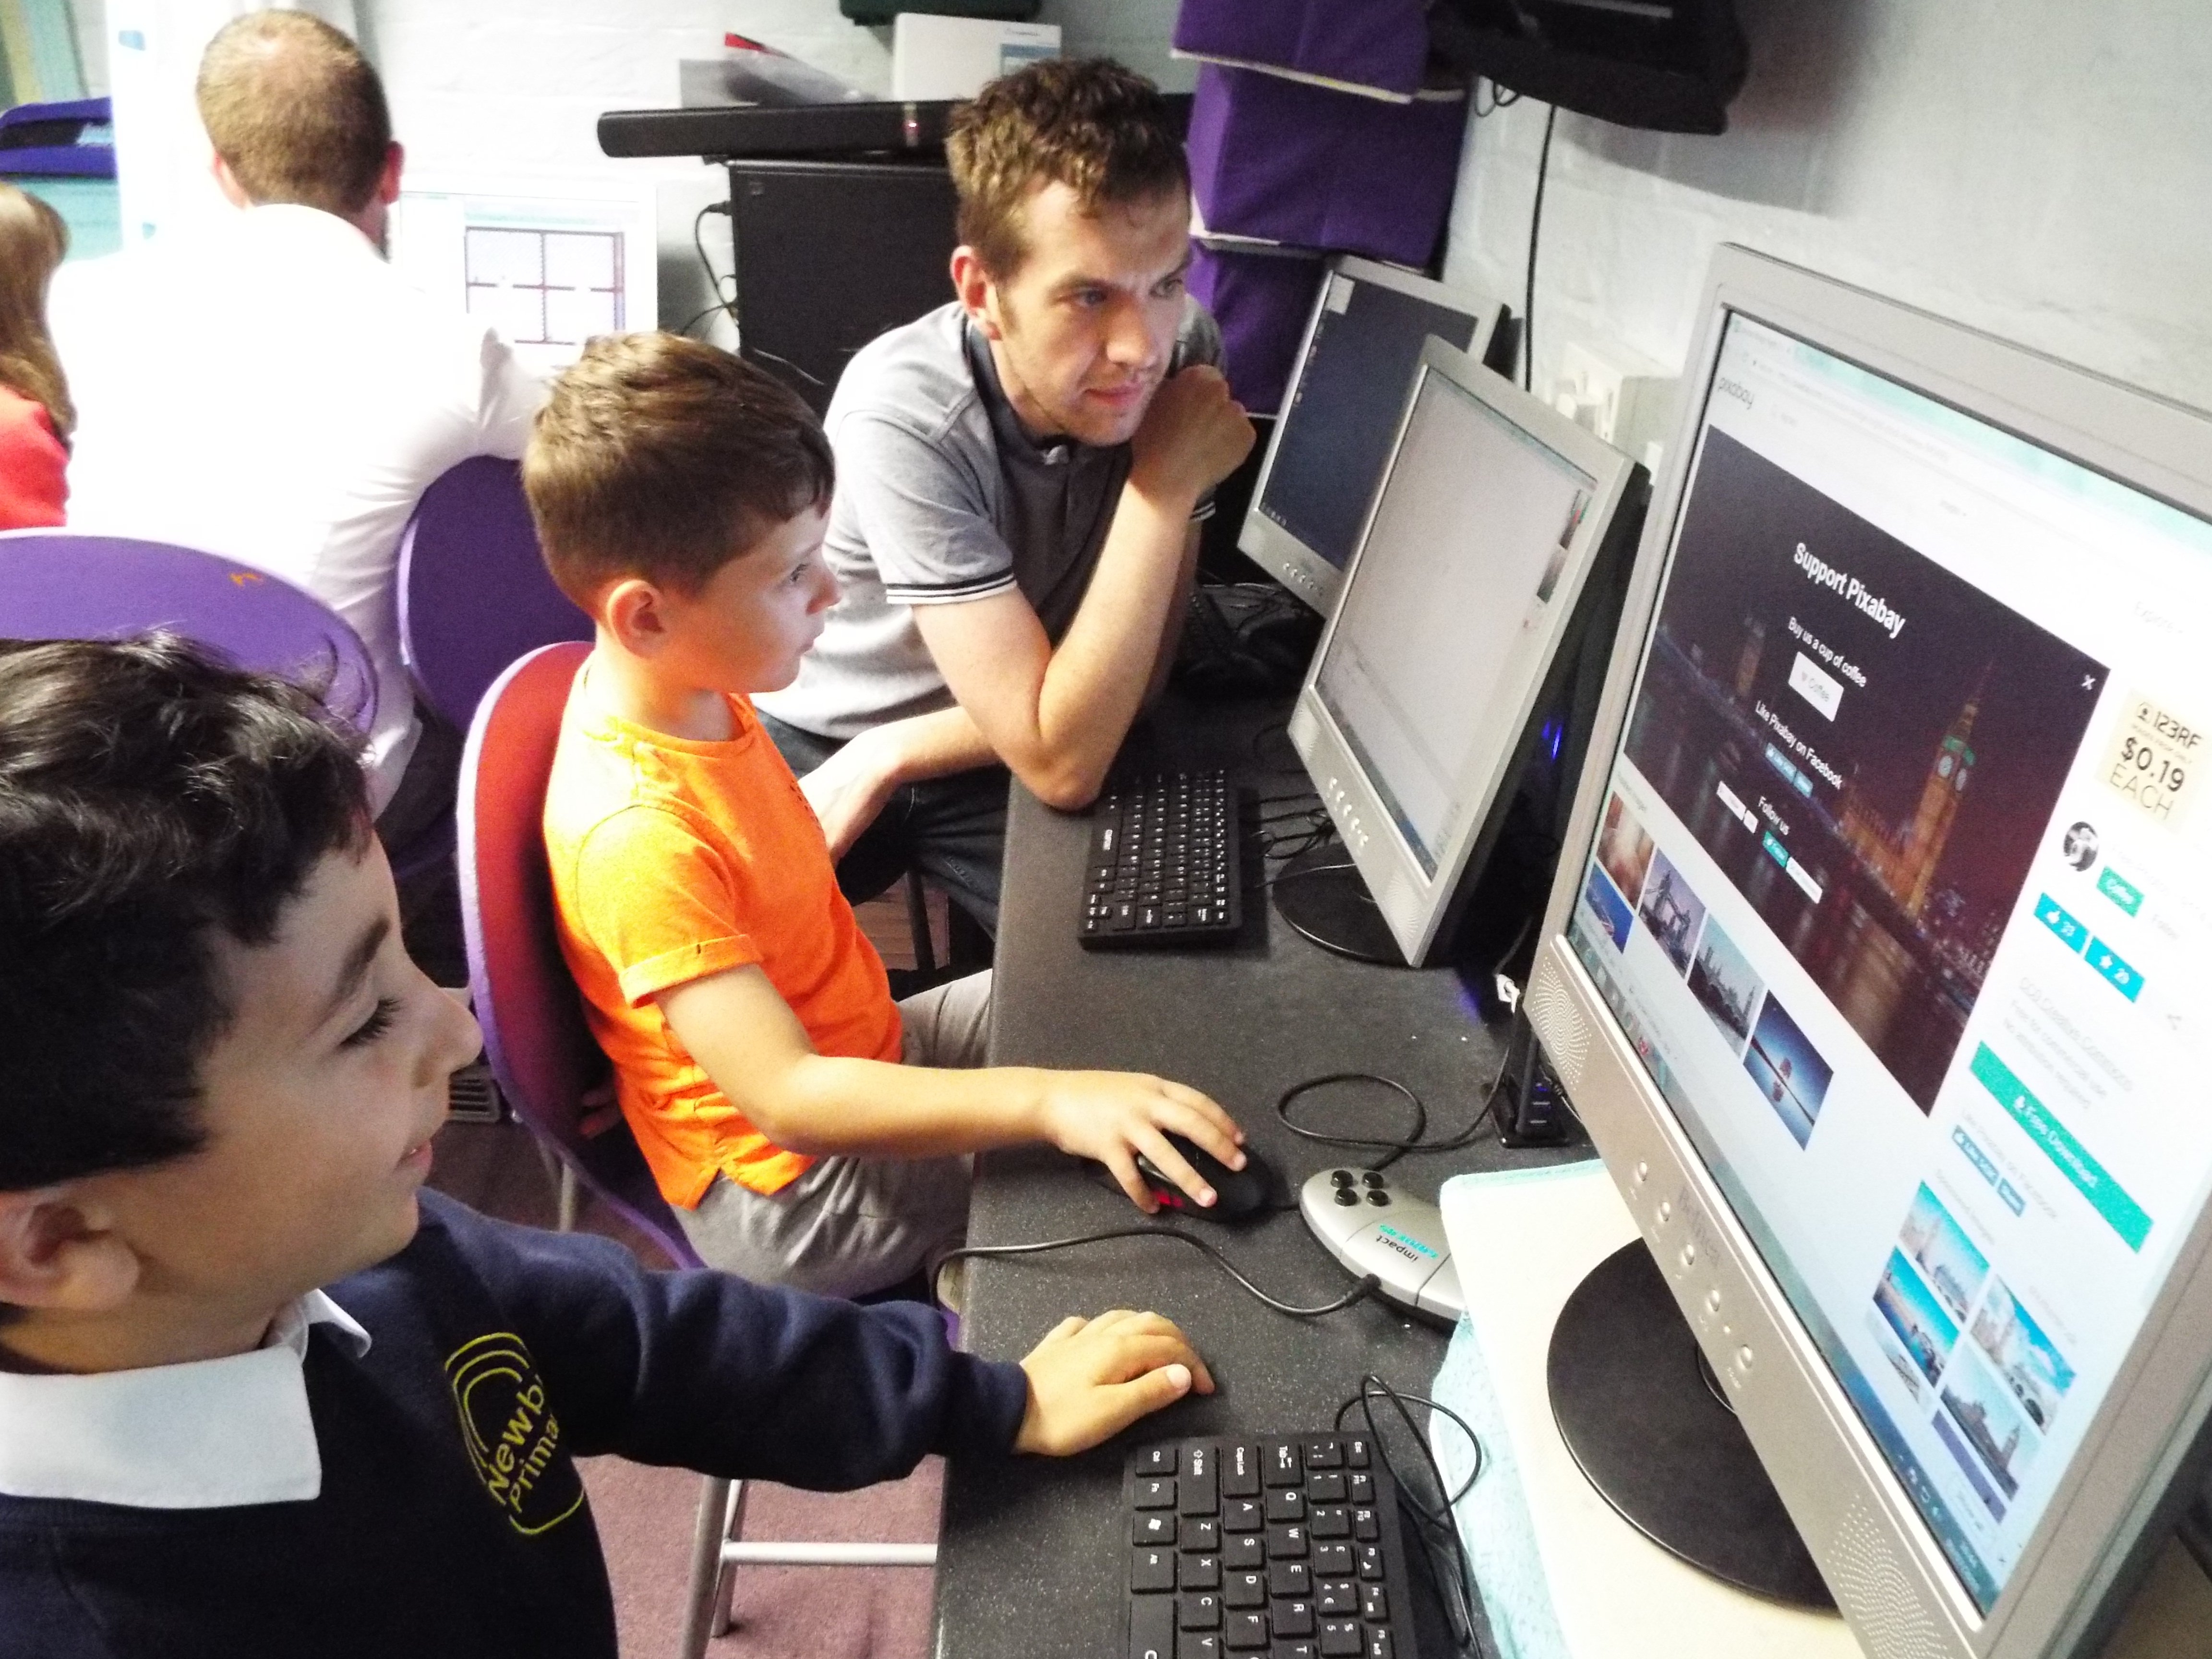 Adam Syrop working with children at Impact Gamers